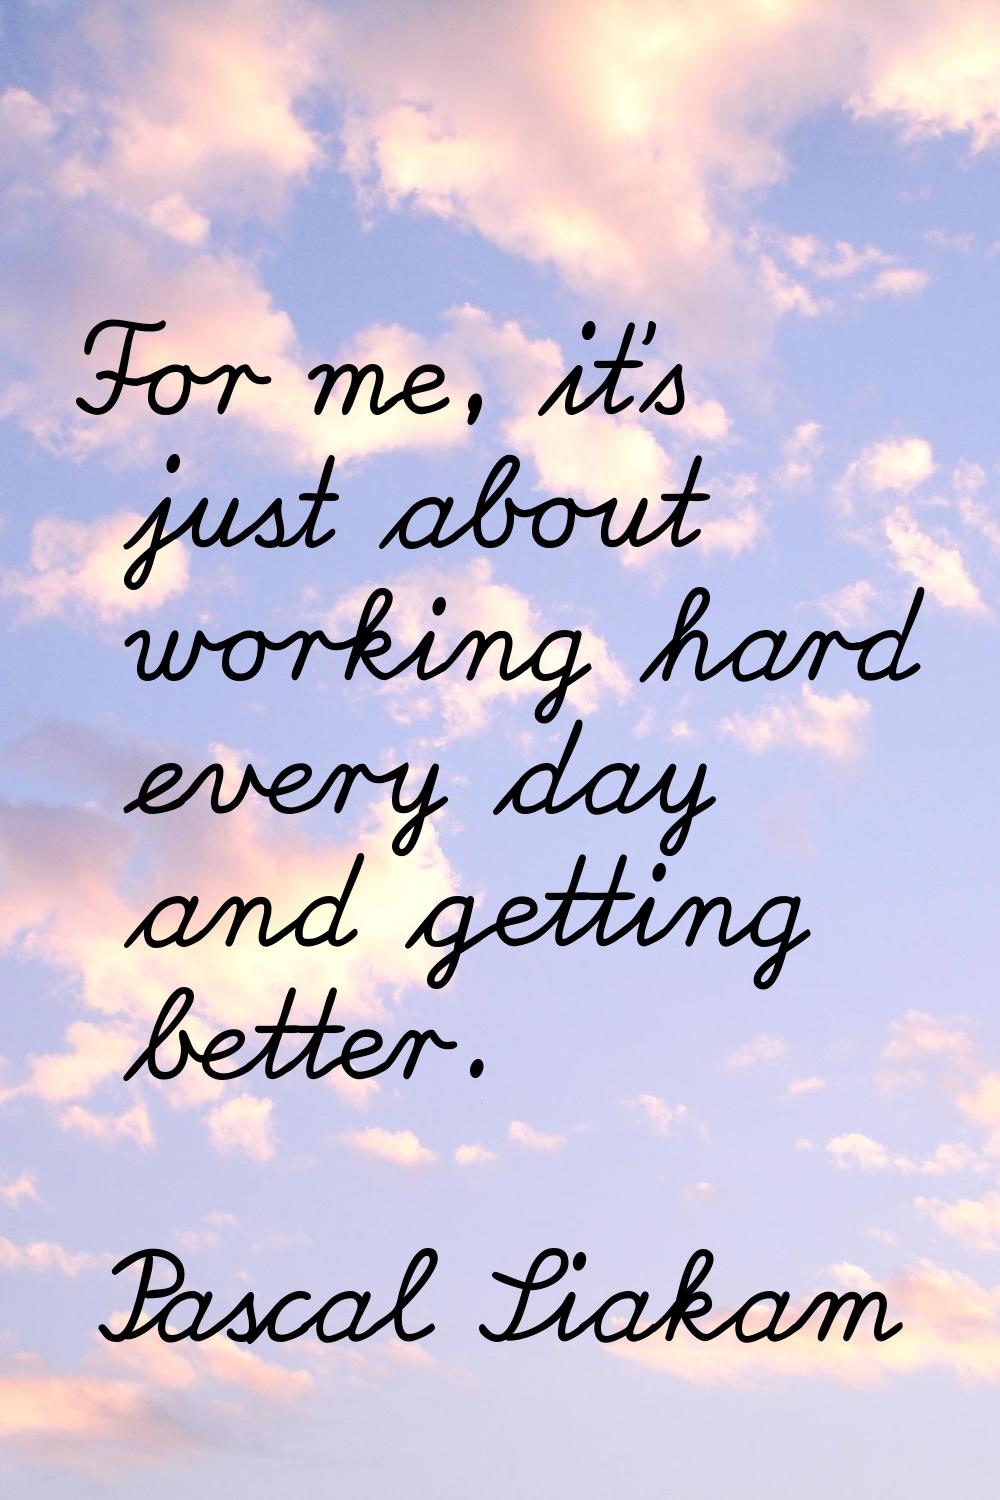 For me, it's just about working hard every day and getting better.